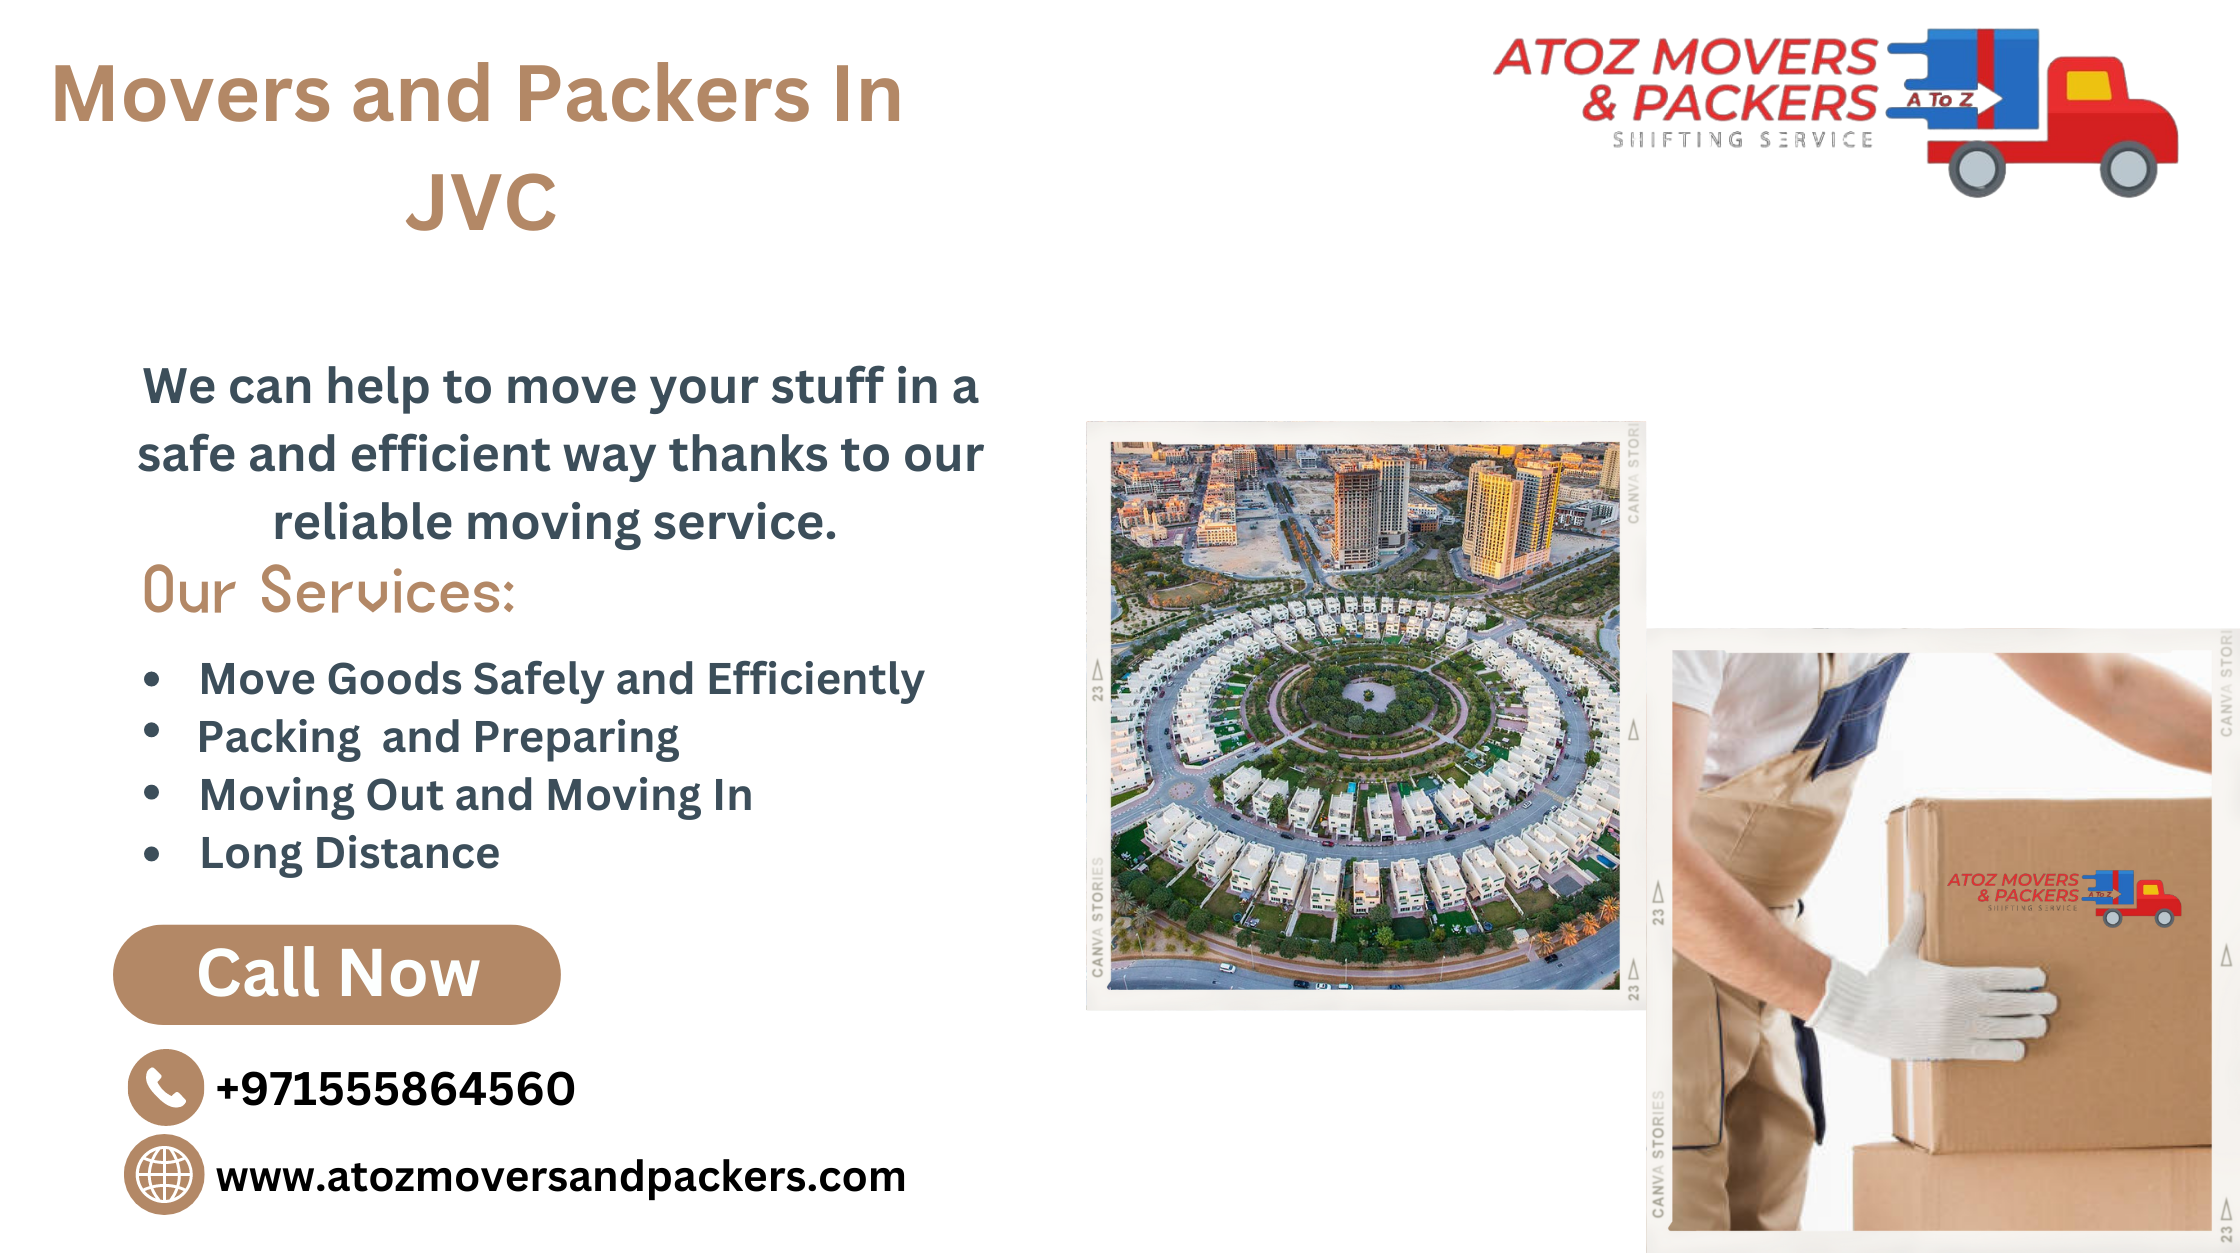 Movers and Packers in JVC